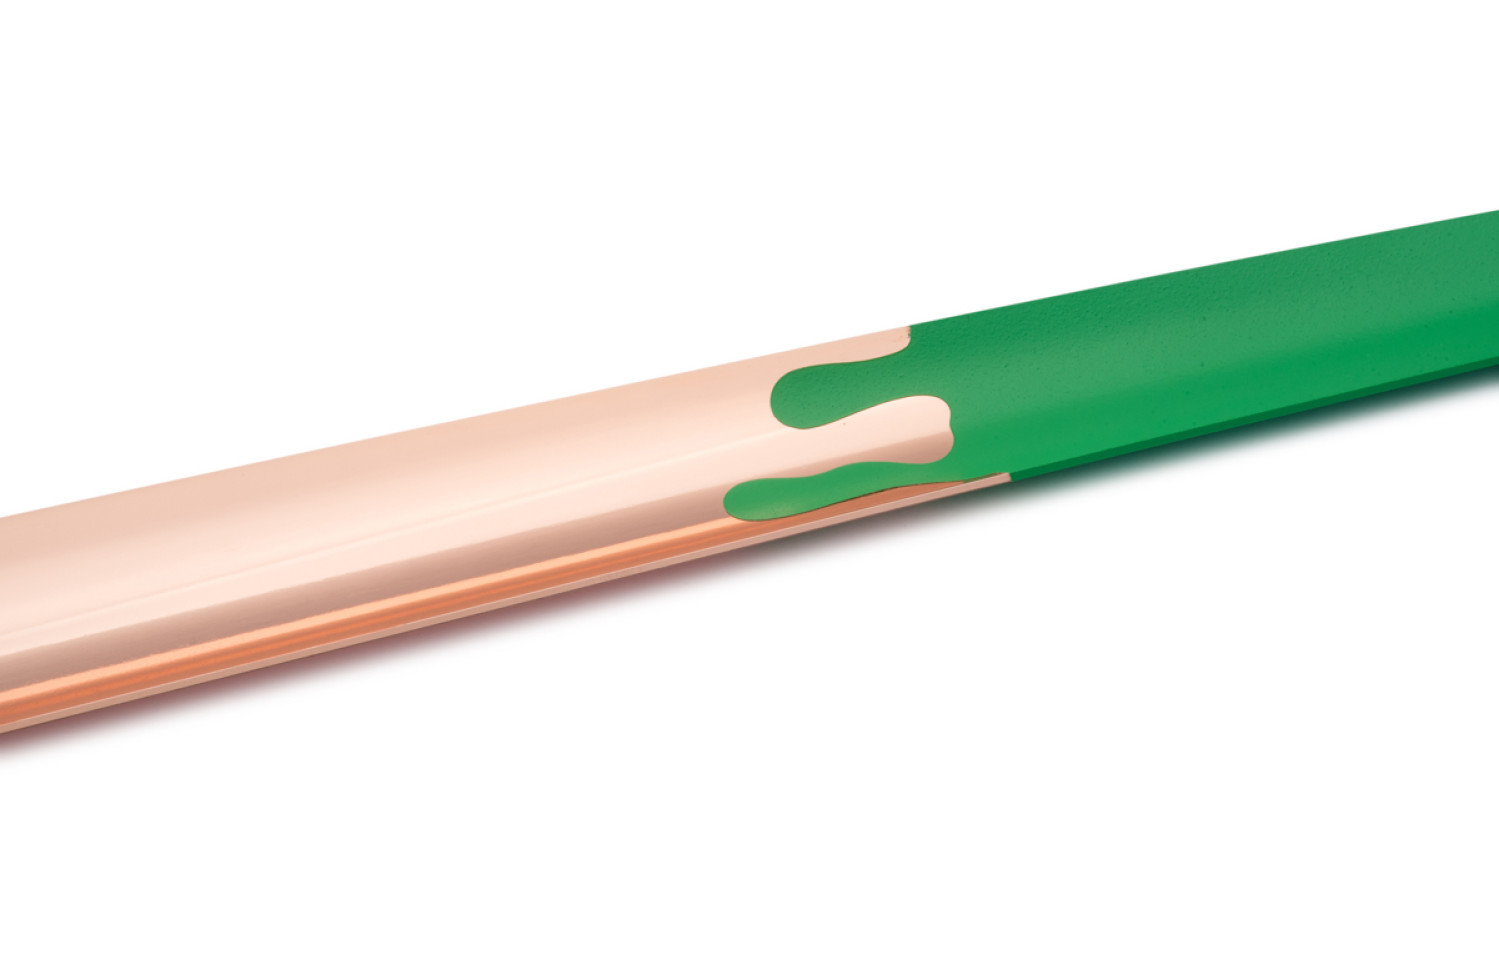 Colorgrip Rose Gold Bright Green